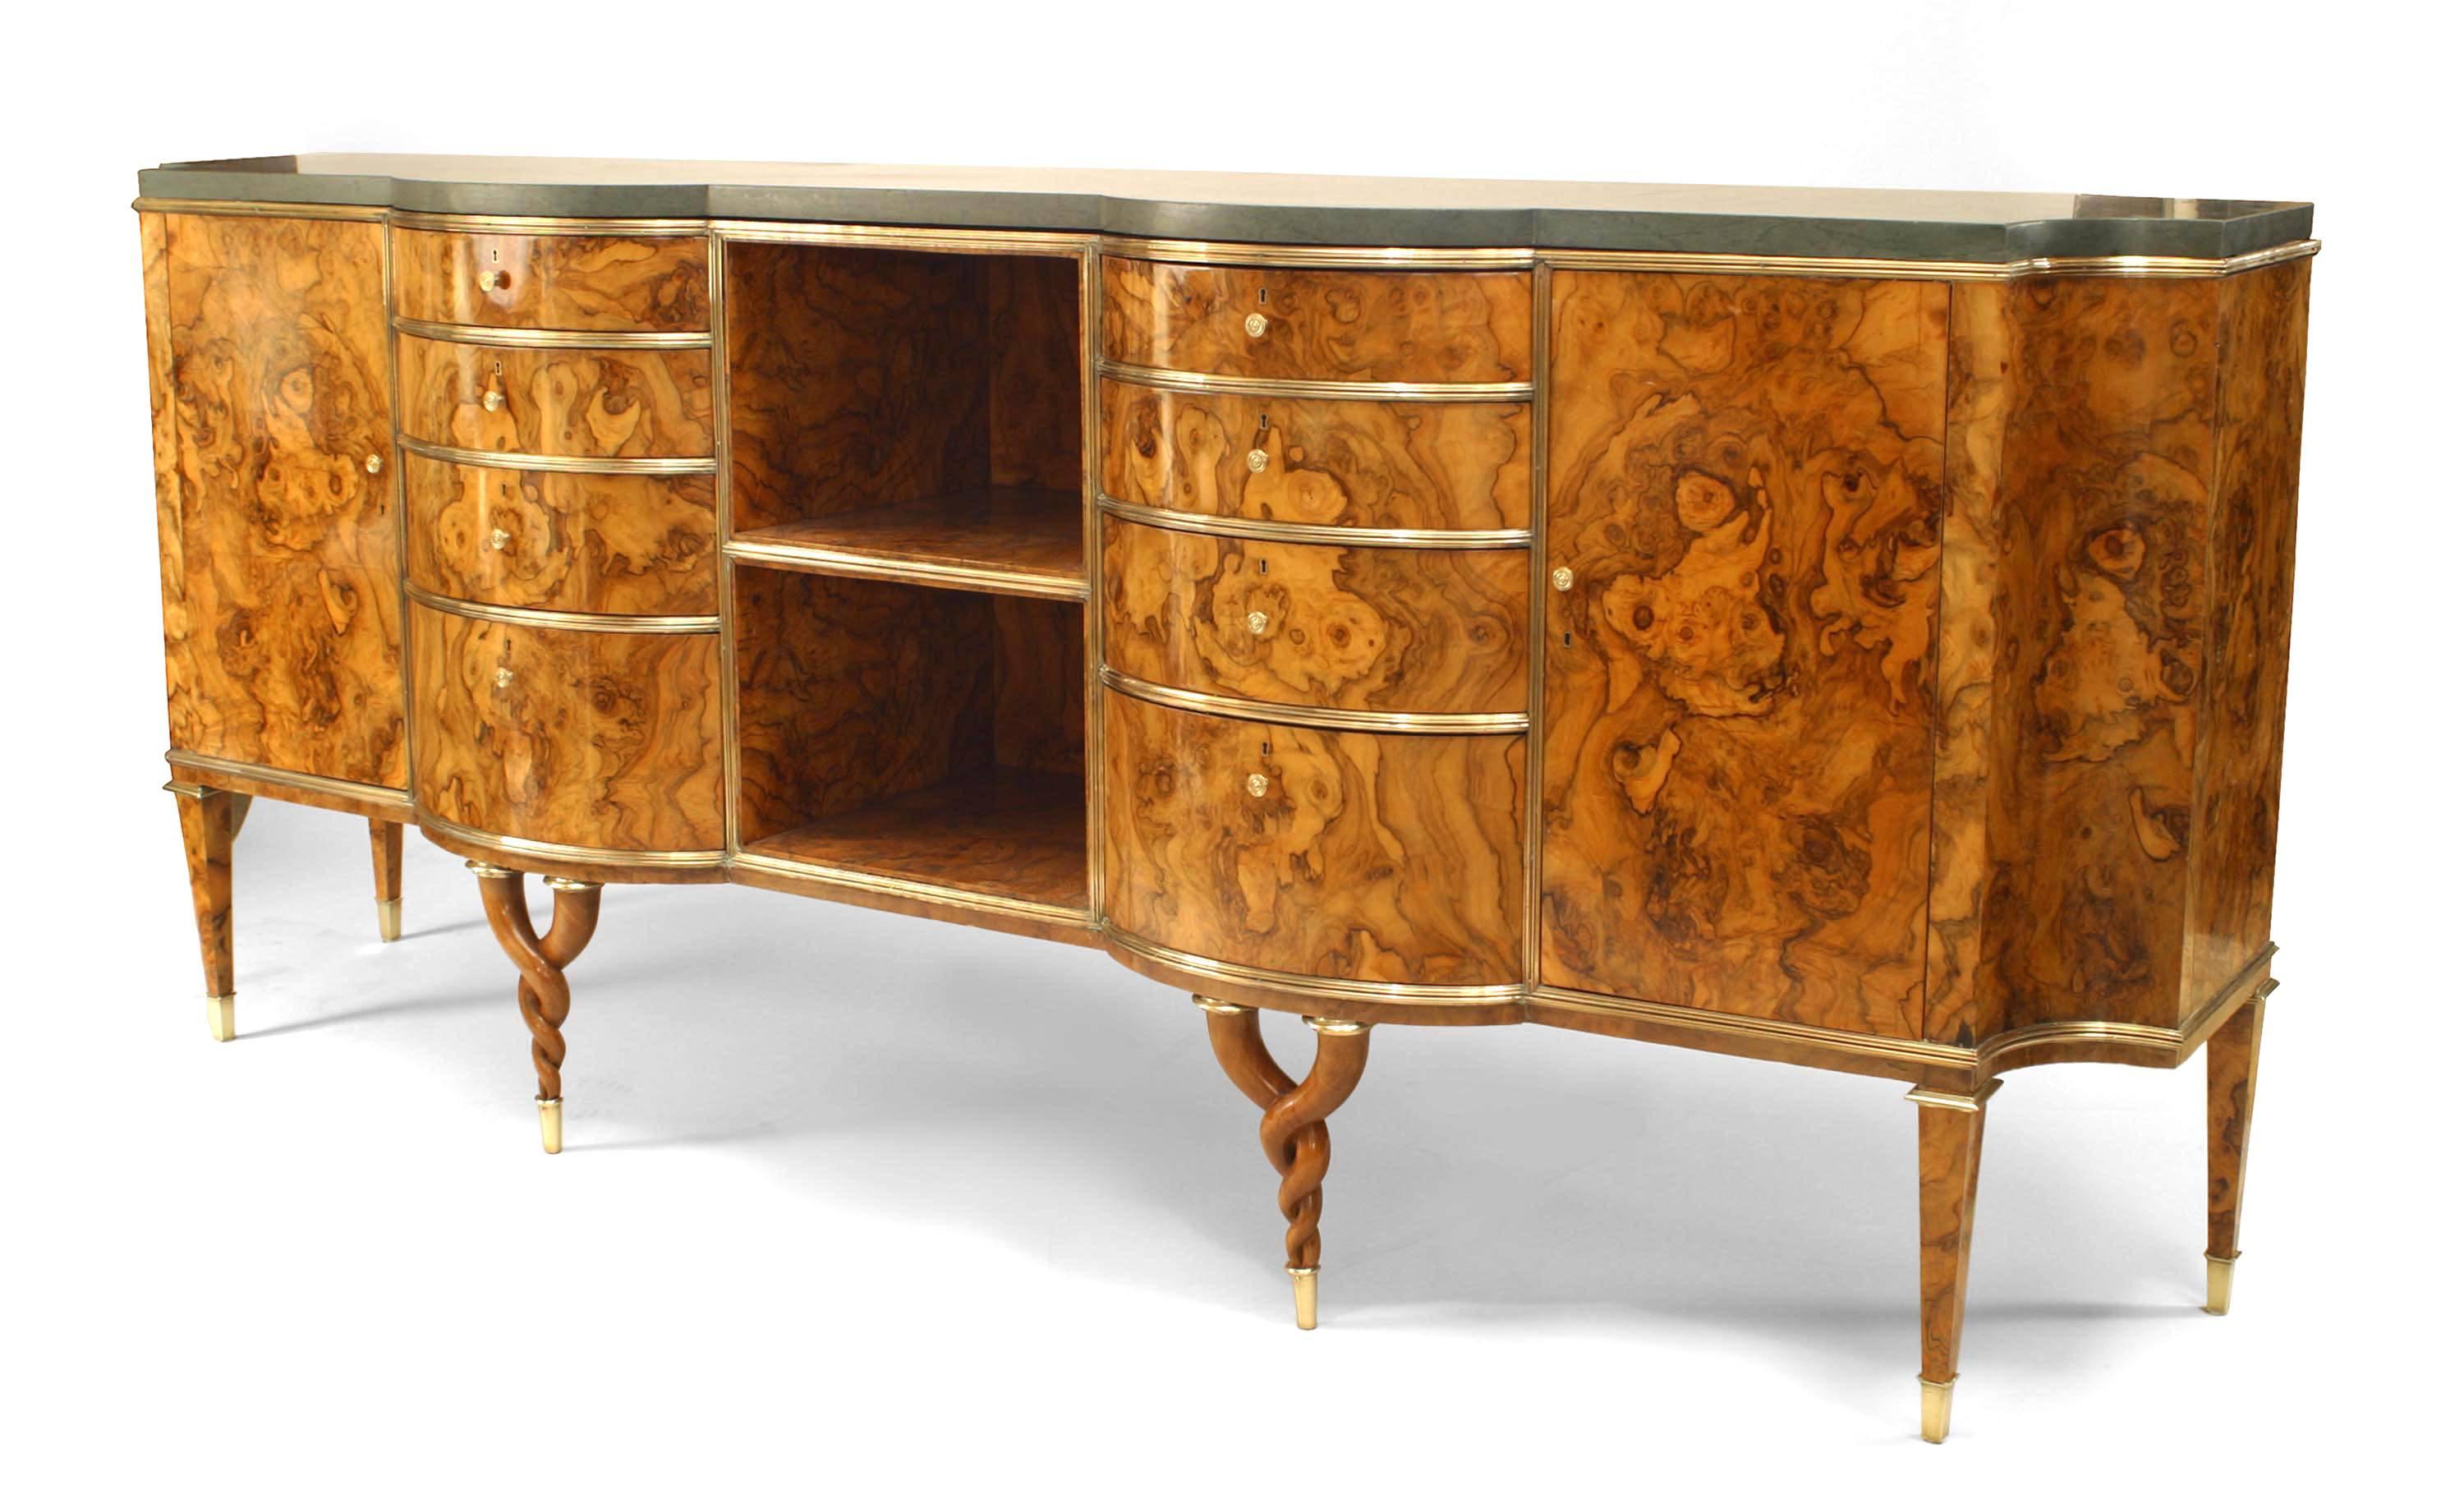 Attributed to Tomaso Buzzi, 1940s, Italian burl root veneered sideboard with twisted legs, a green marble top, and bronze trim. The piece features two stacked open shelves flanked by two sets of four drawers, and two cabinet doors.


Born in